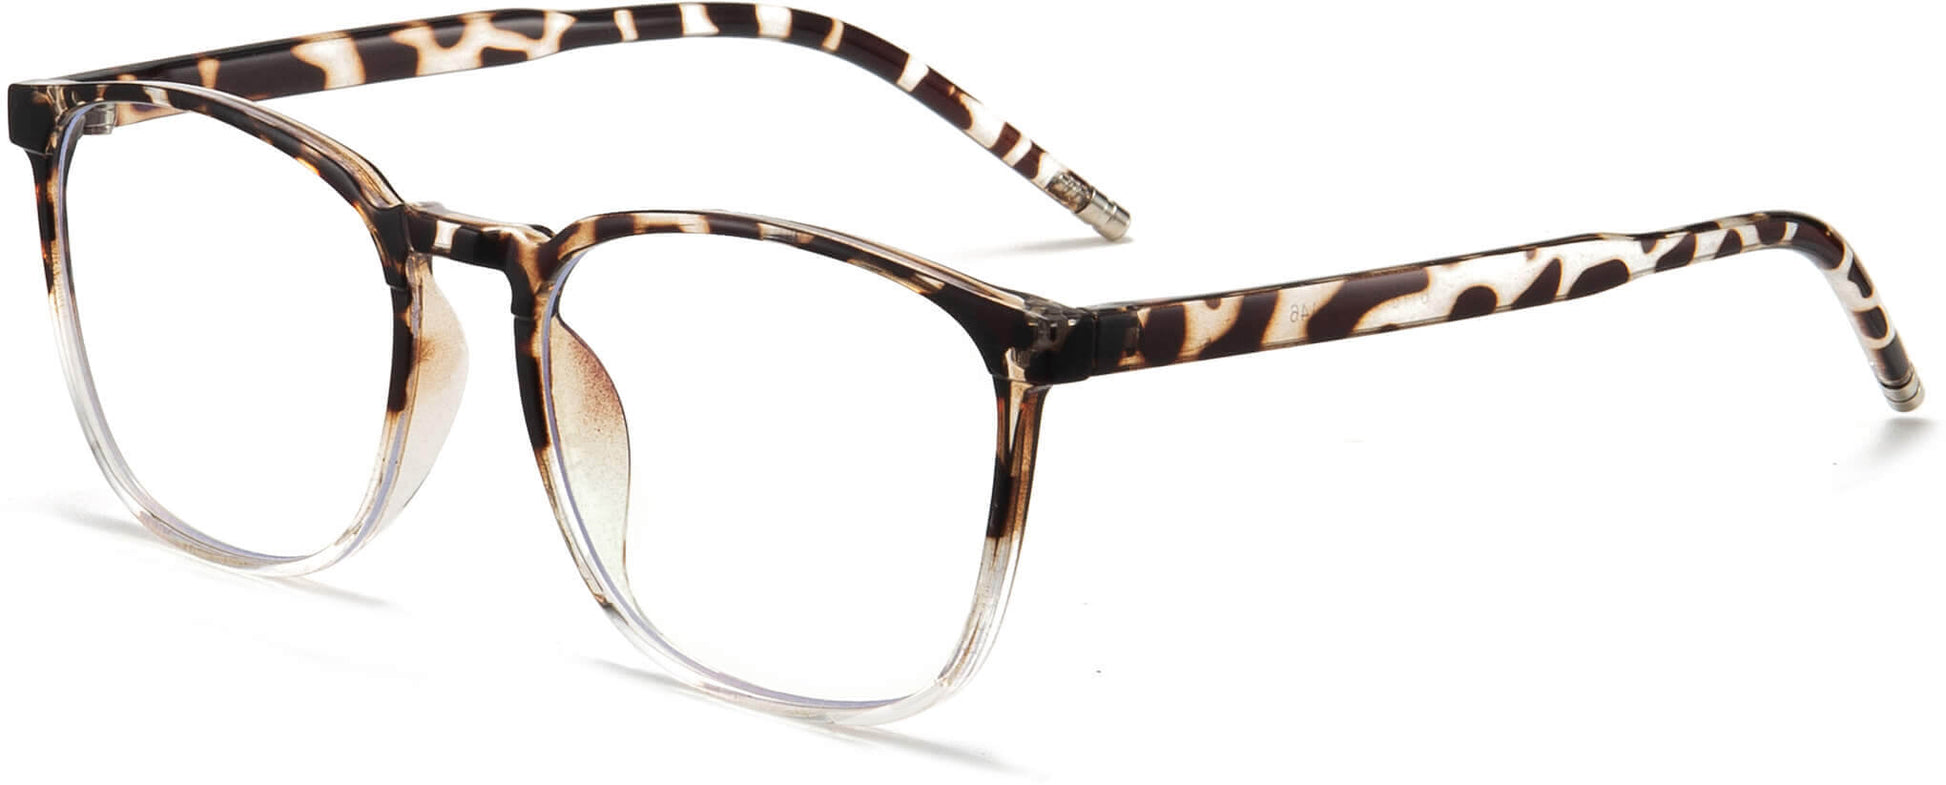 Lennon Leopard TR90 Eyeglasses from ANRRI, Angle View